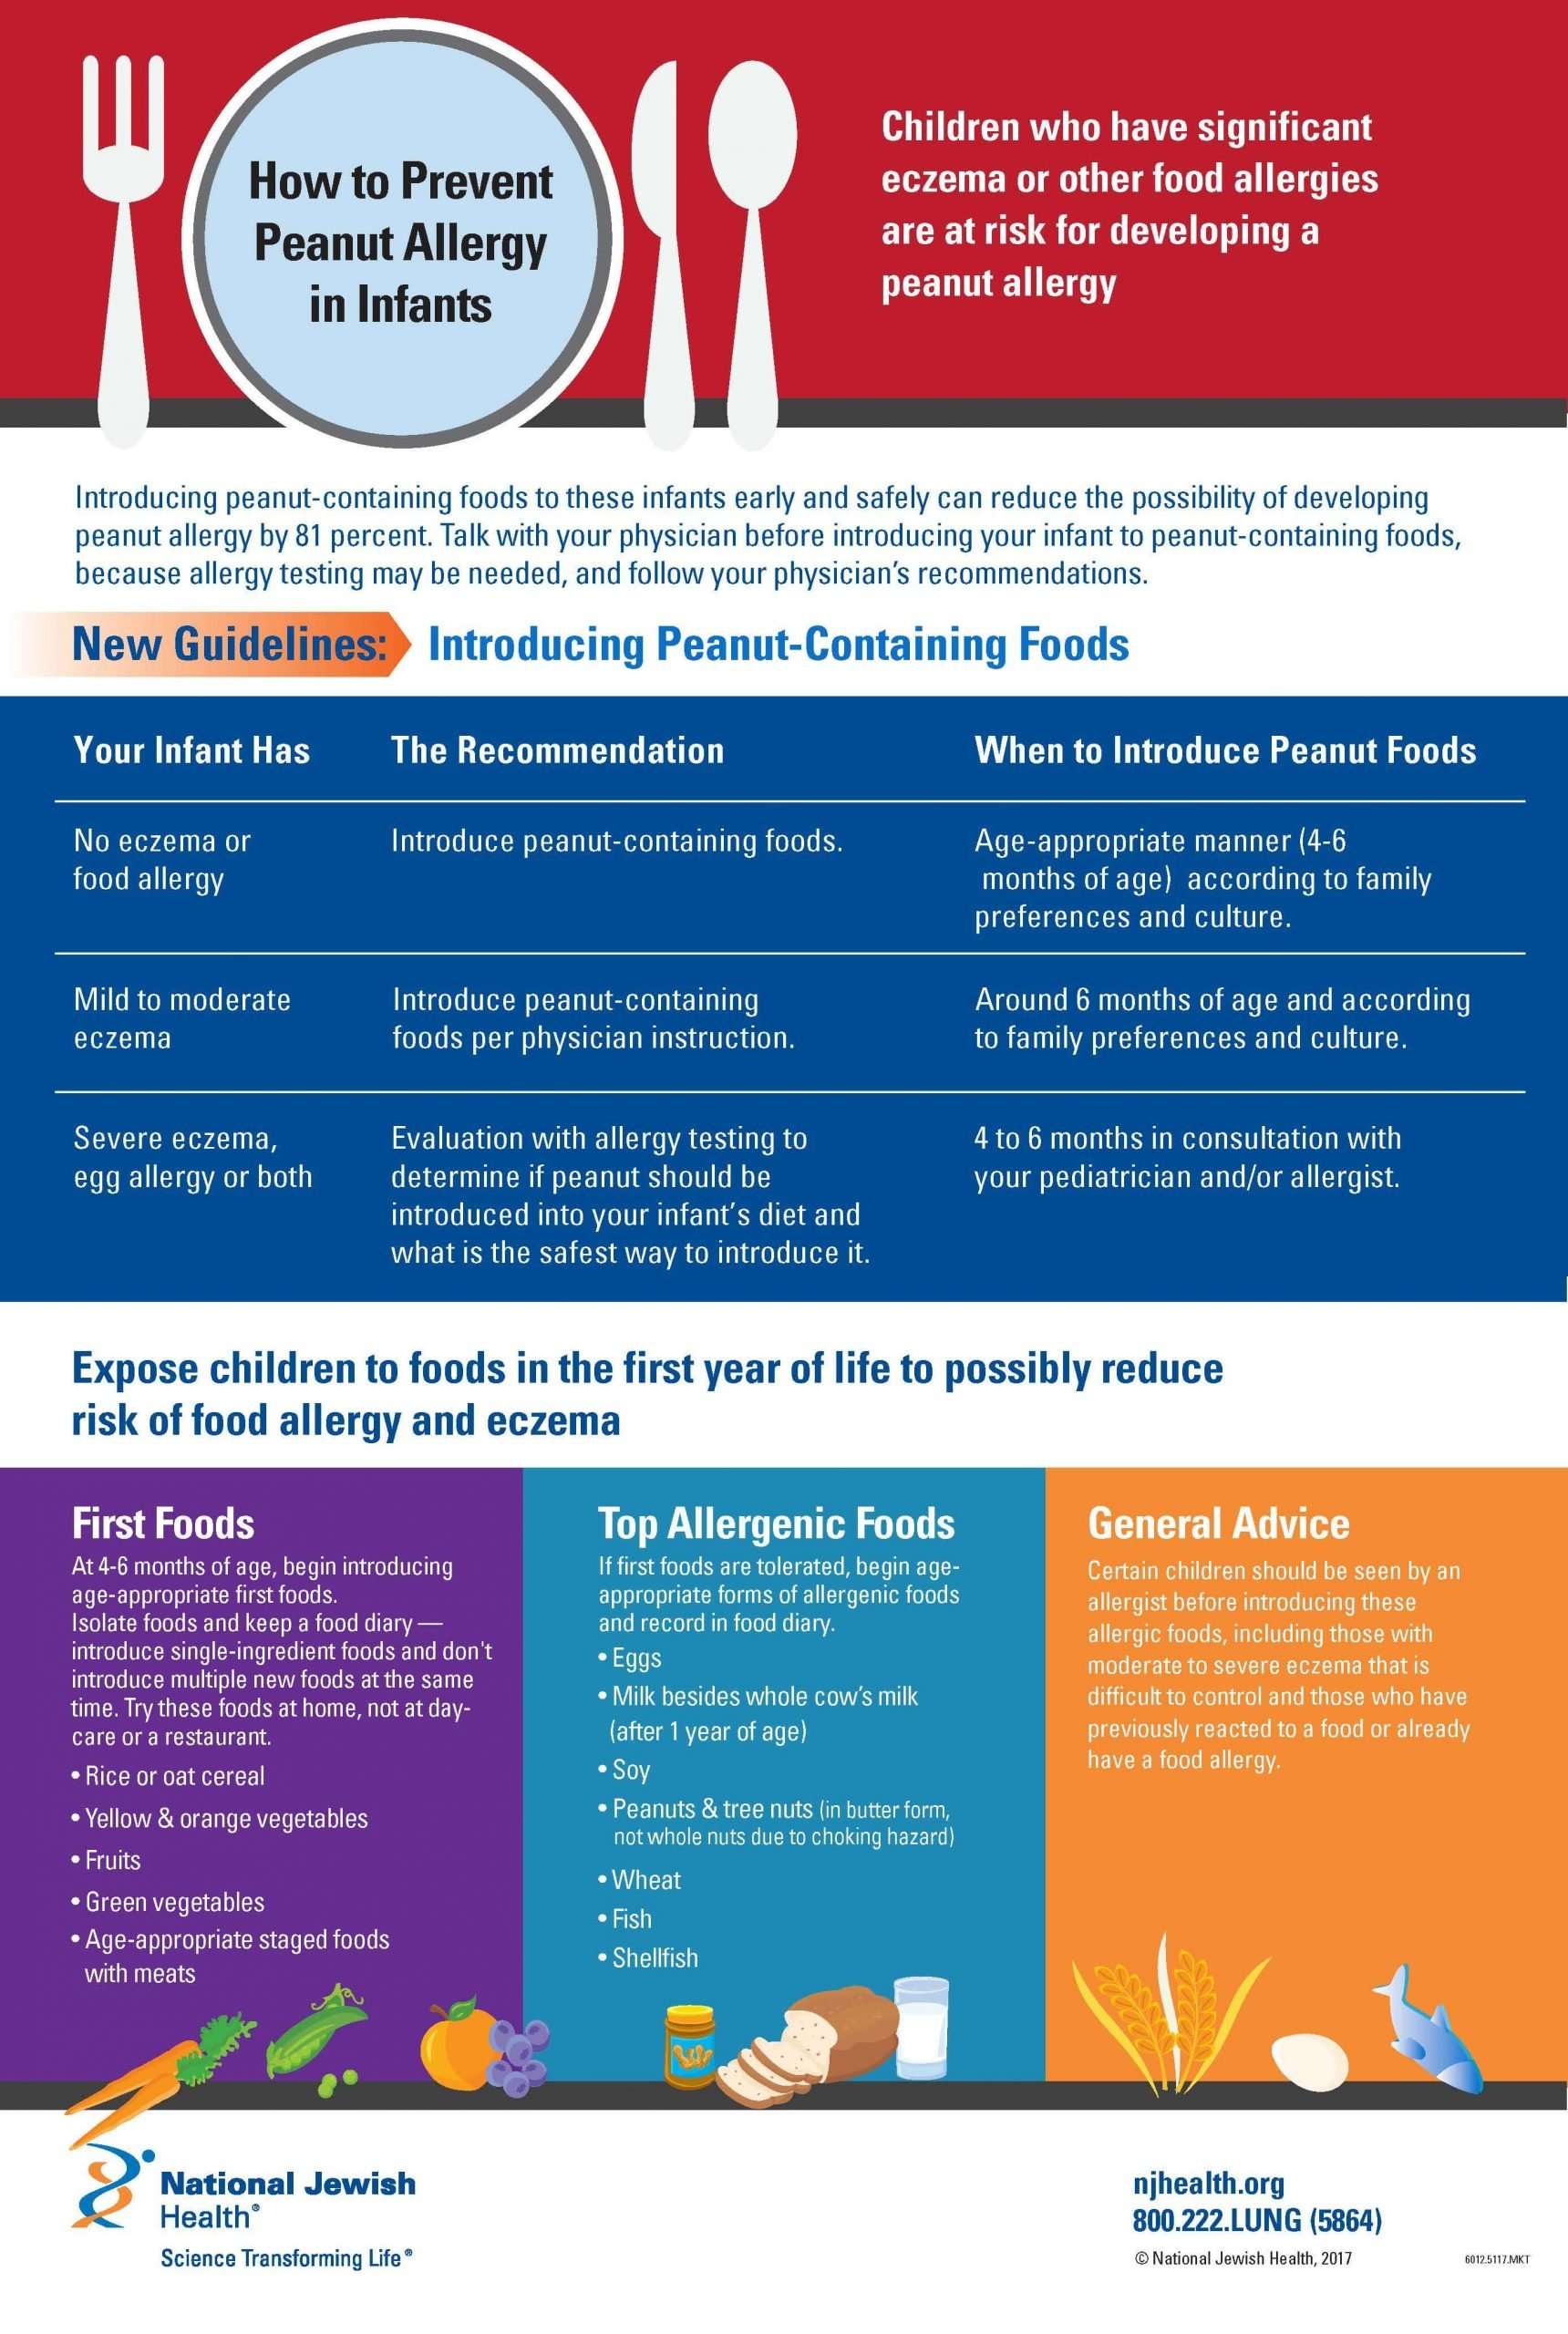 How to Prevent Peanut Allergy in Infants